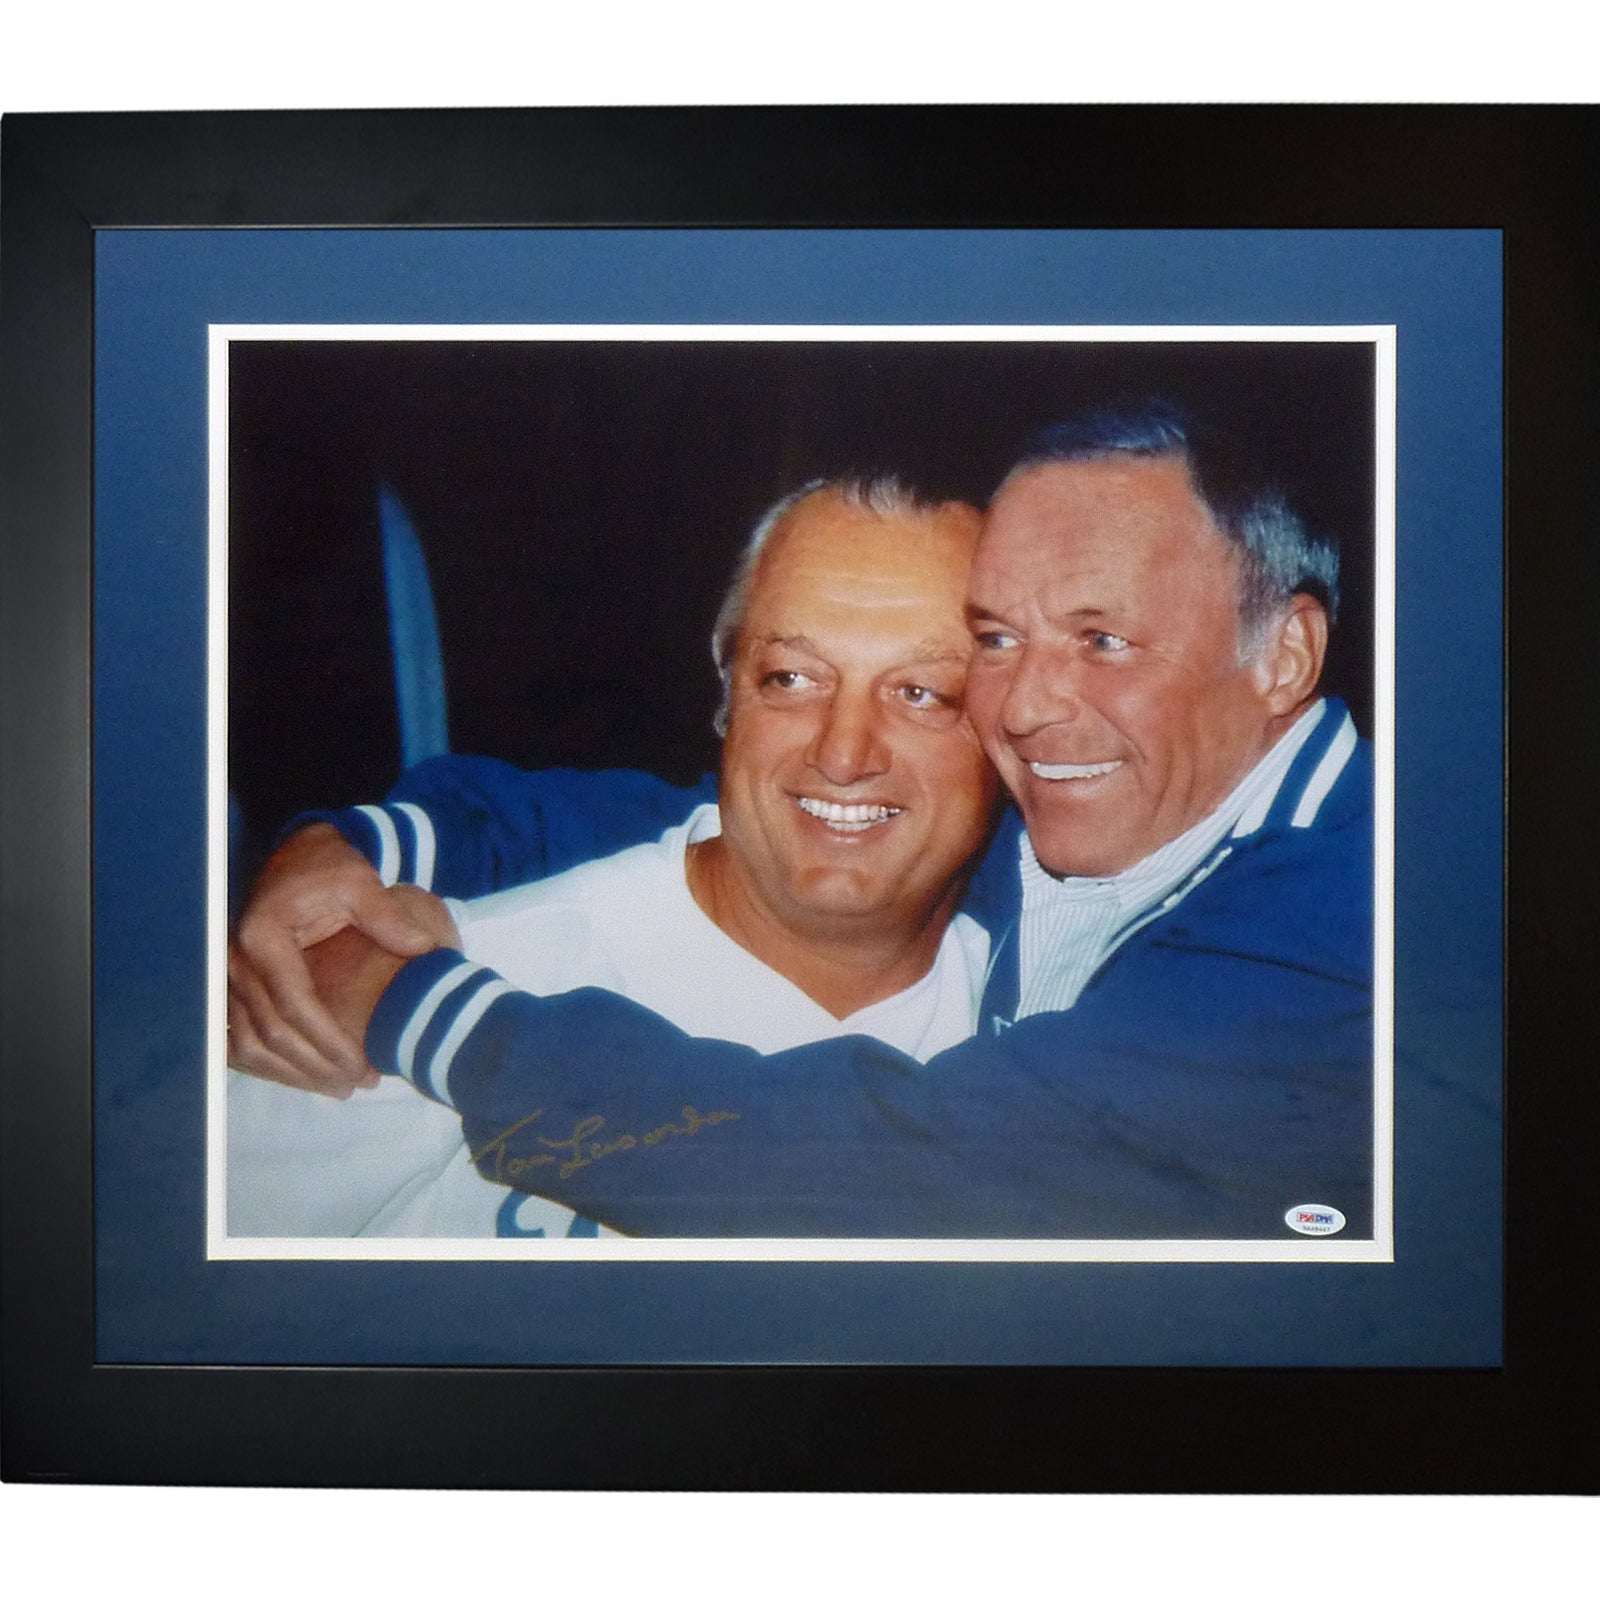 Tommy Lasorda Autographed Los Angeles Dodgers (With Frank Sinatra) Deluxe Framed 16x20 Photo - PSADNA